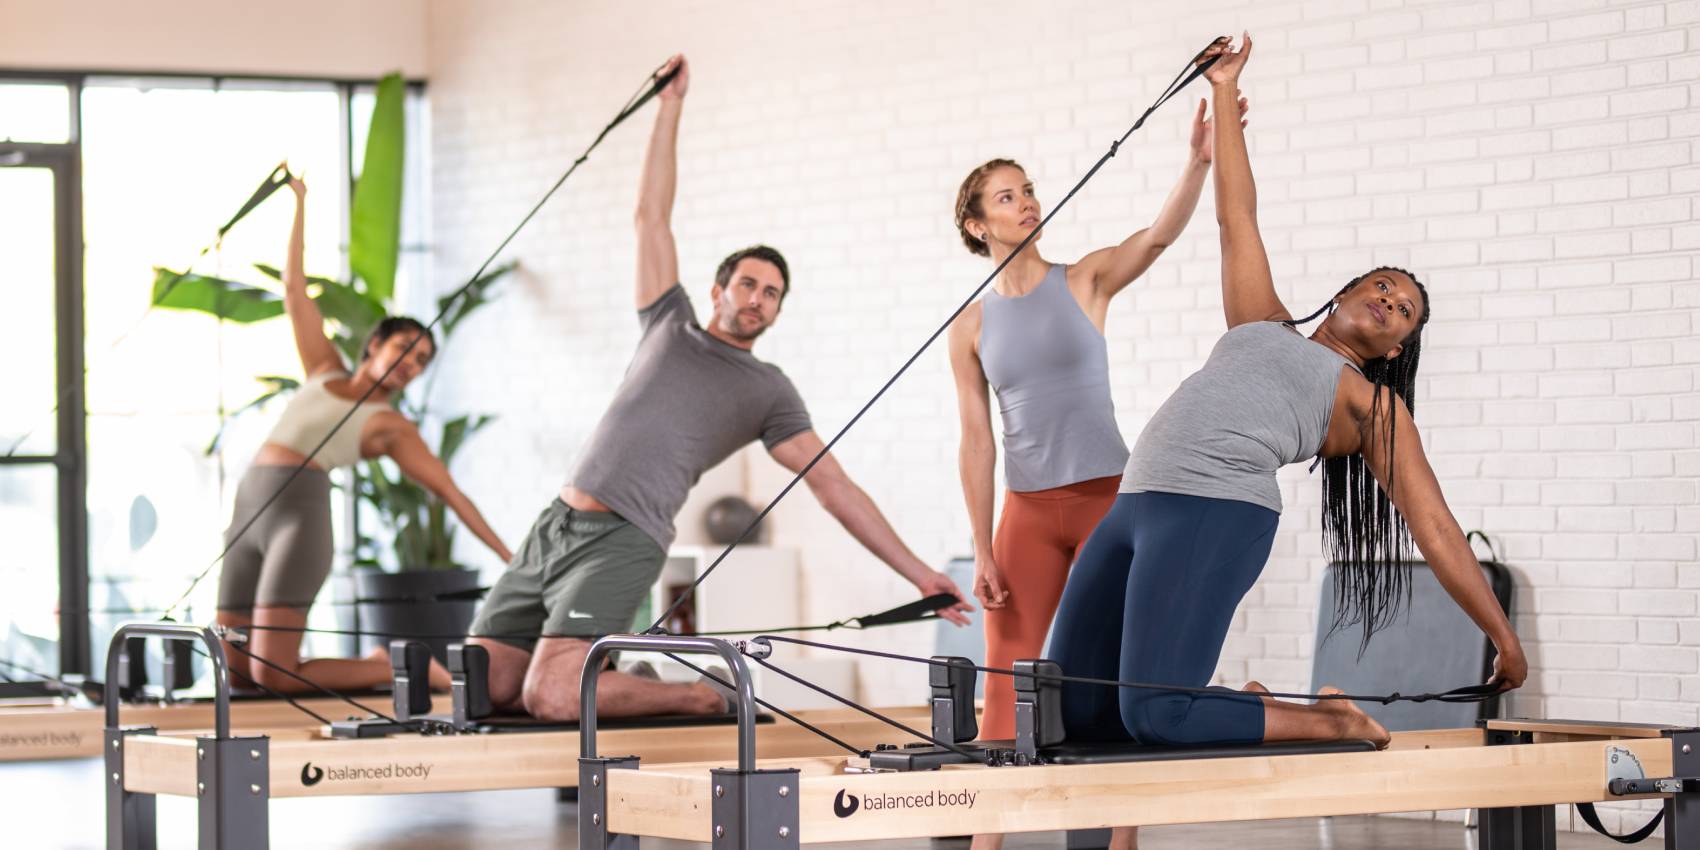 Pilates Instructor Training - How to Become a Pilates Instructor